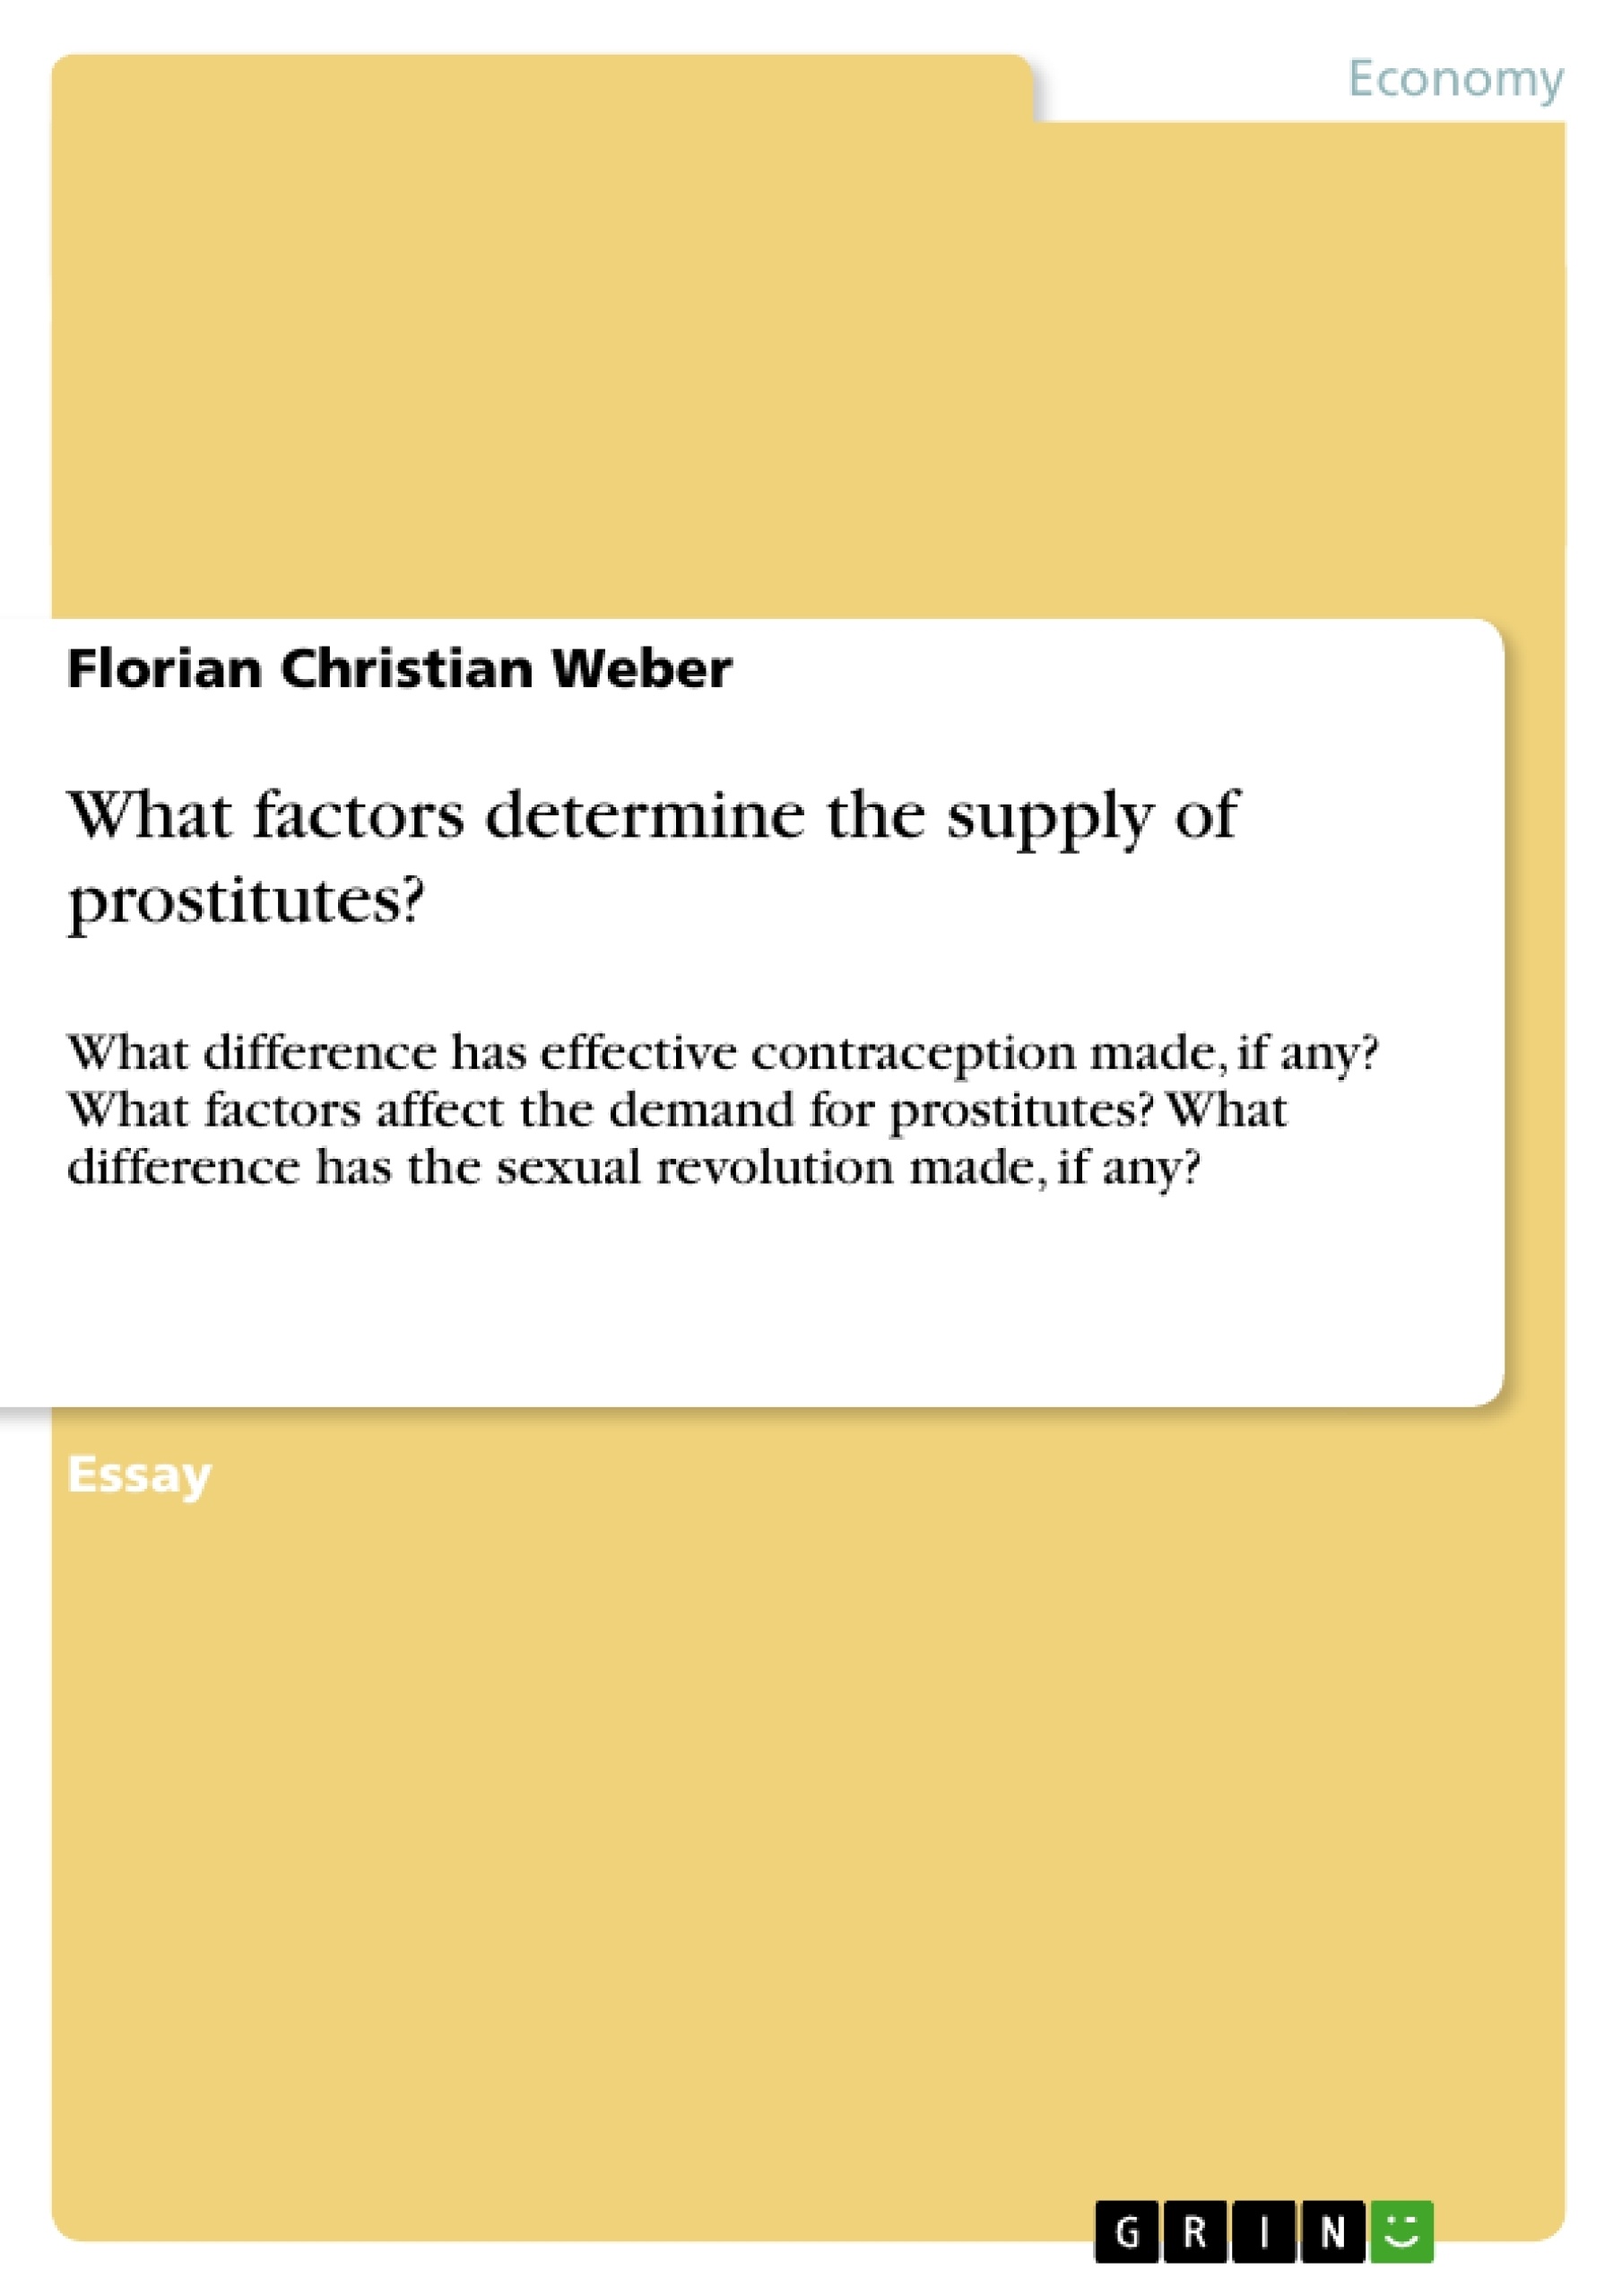 Title: What factors determine the supply of prostitutes? 